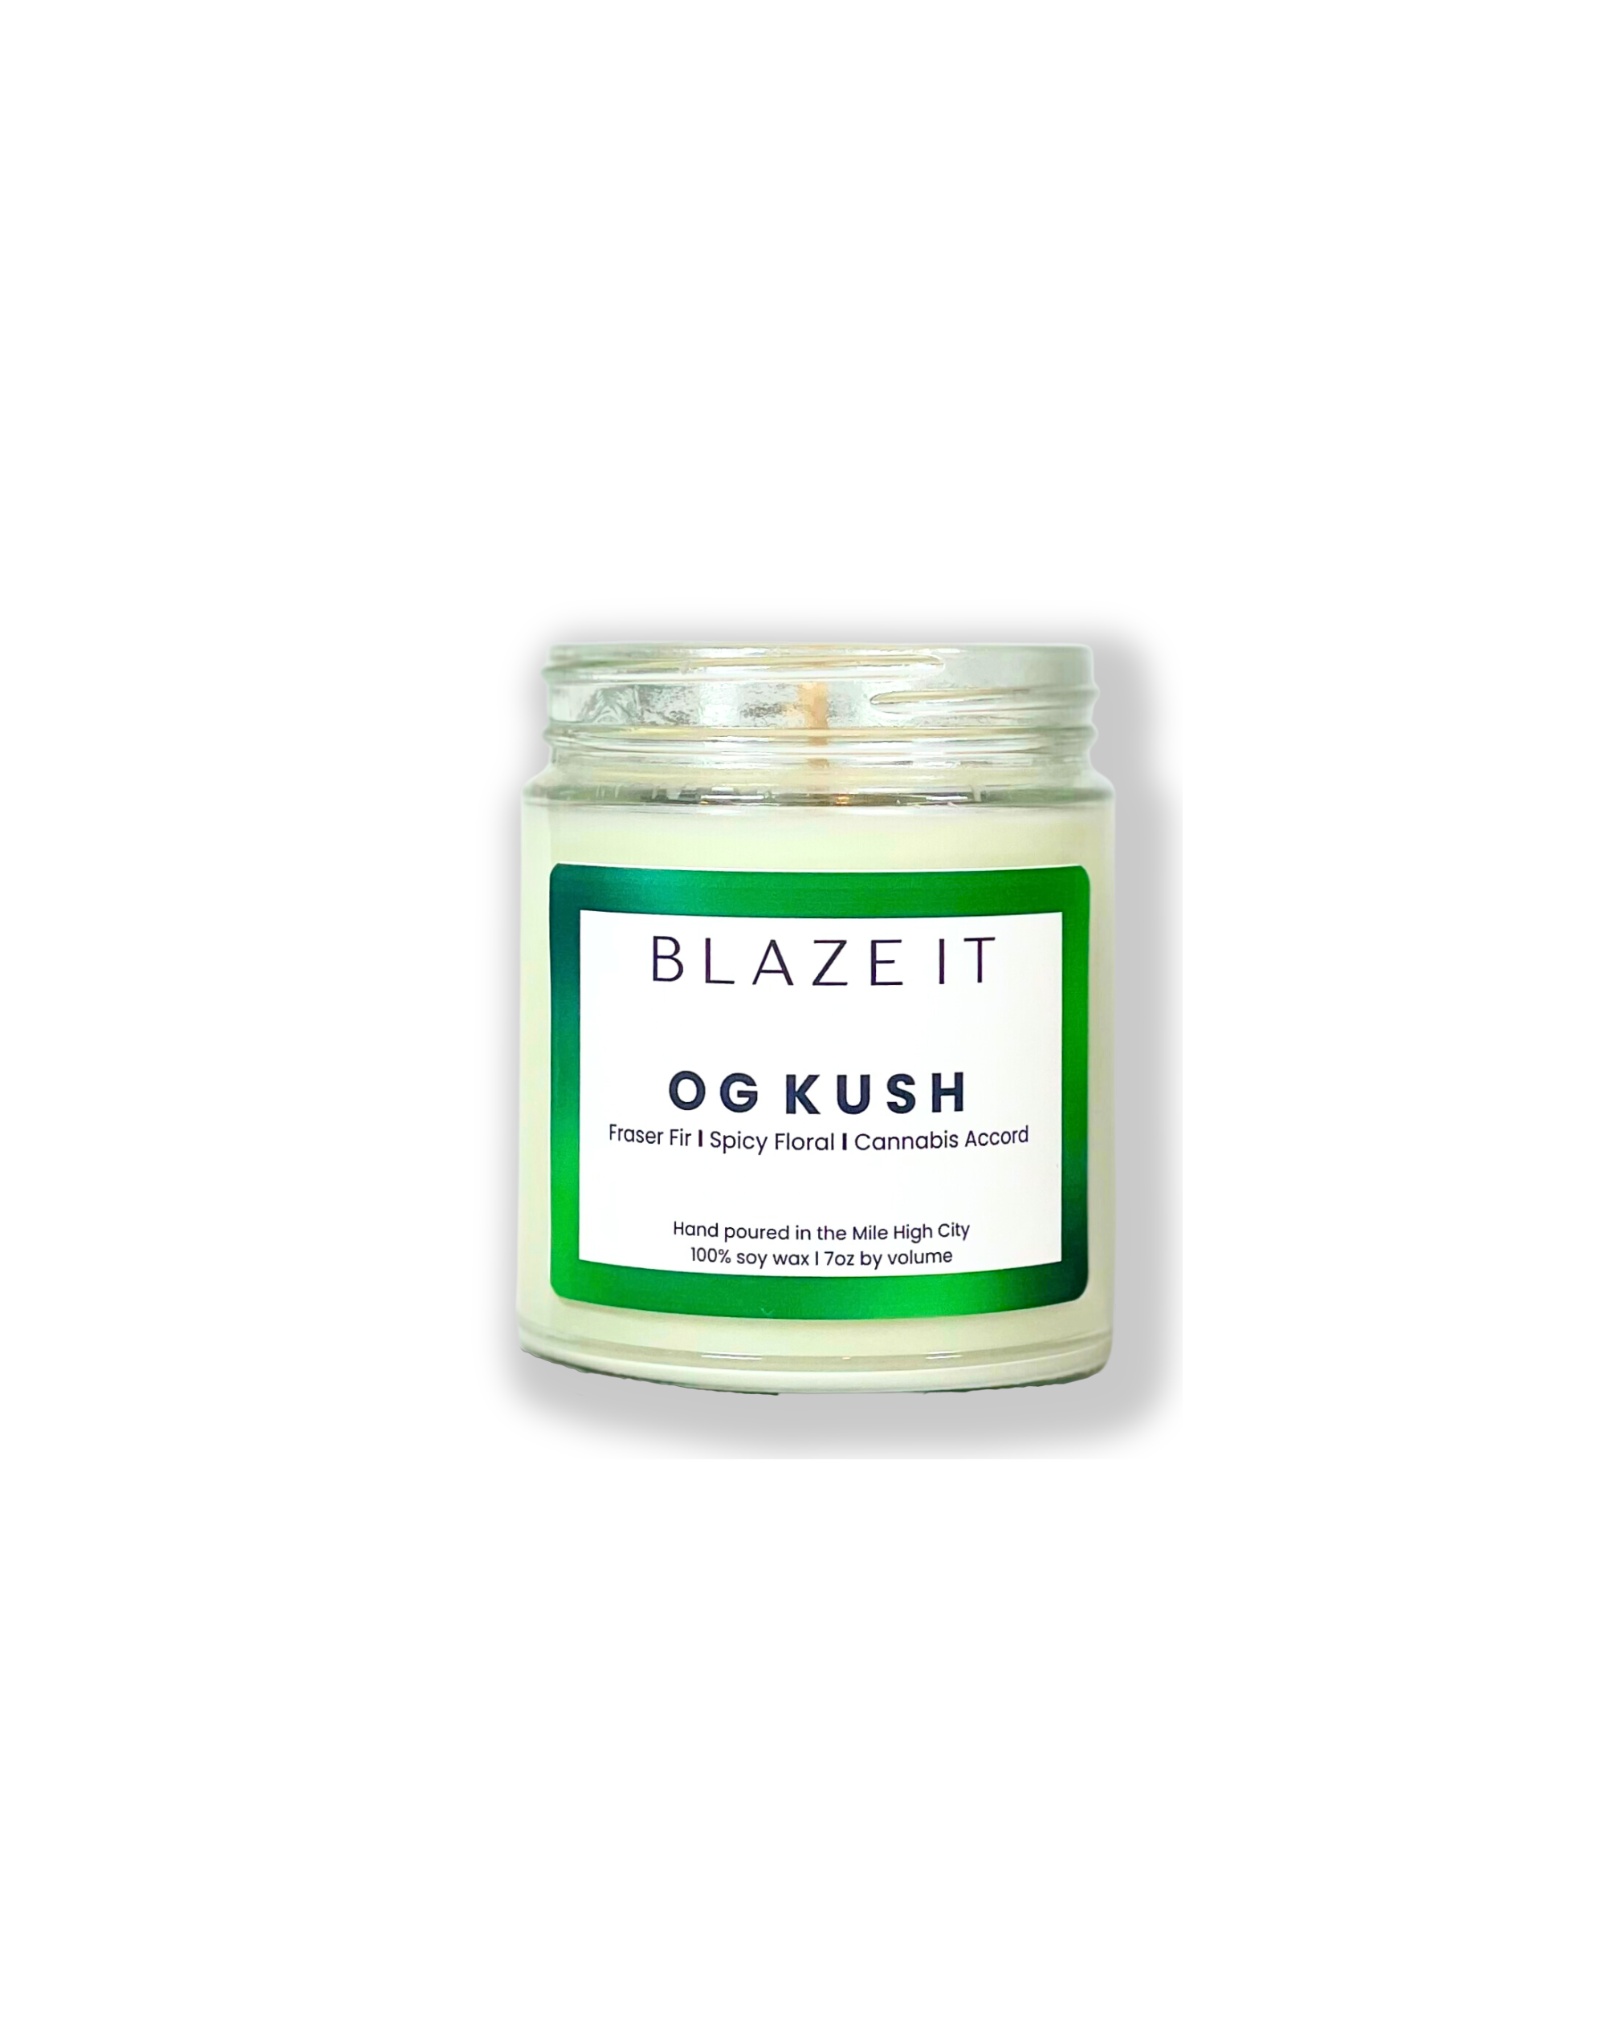 OG Kush 7oz single wick candle with notes of fraser fir, spicy floral and cannabis accord Blaze It Candle Co